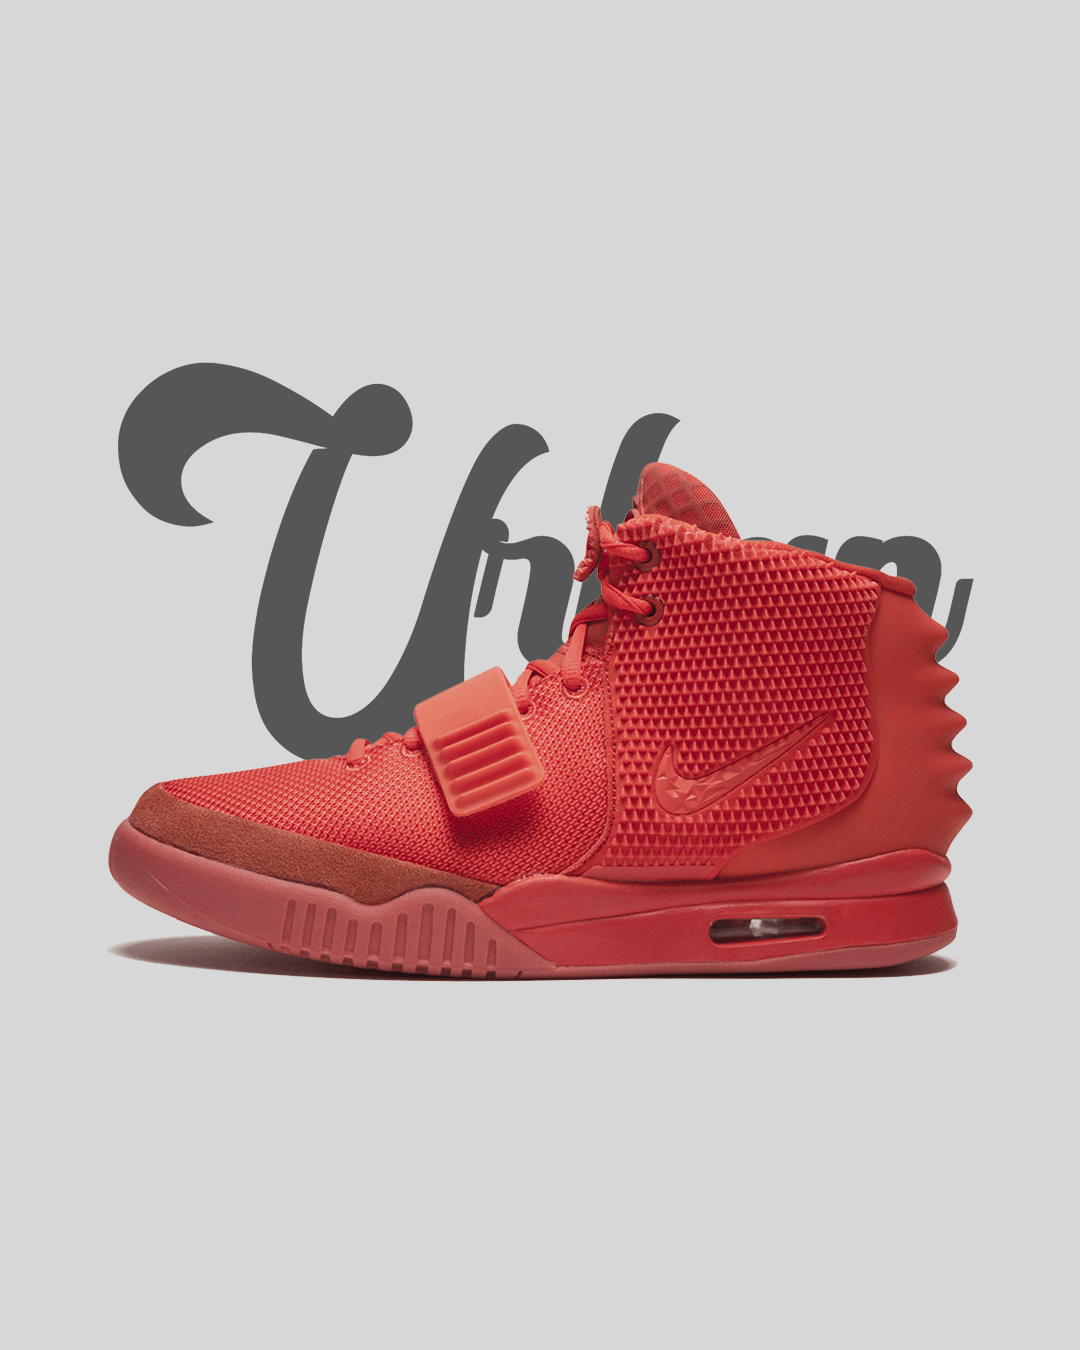 Nike Air 2 Red October – Urban Collection